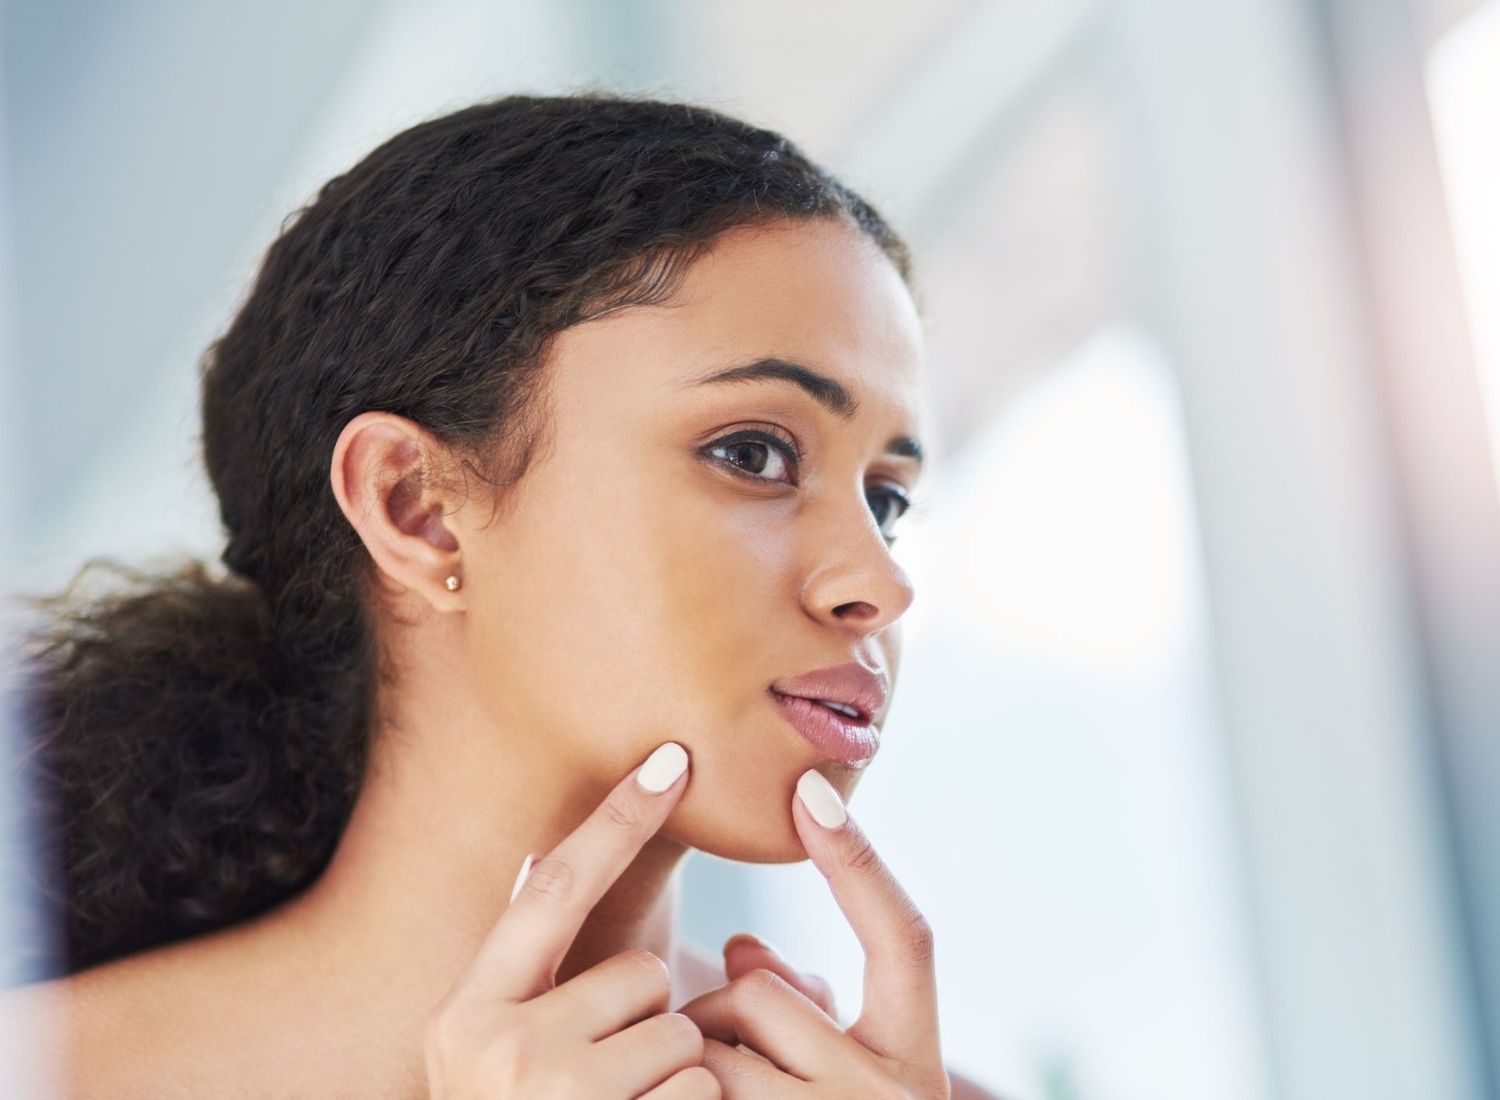 6 Simple Ways To Get Rid Of Acne Effectively